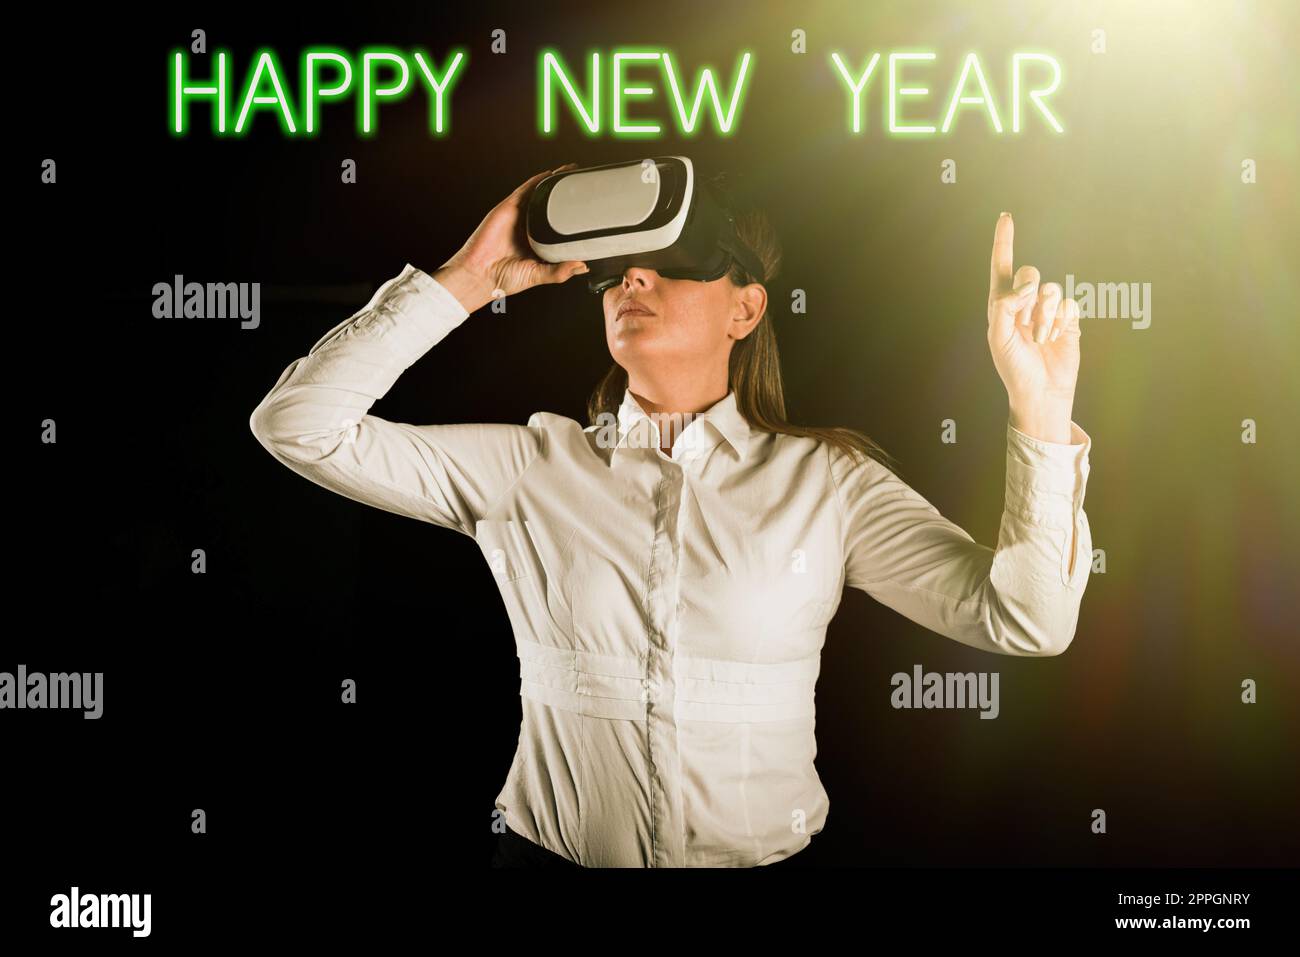 Conceptual caption Happy New Year. Internet Concept Greeting Celebrating Holiday Fresh Start Best wishes Woman Holding Tablet Presenting Digital Navigation Pin And Loading S. Stock Photo